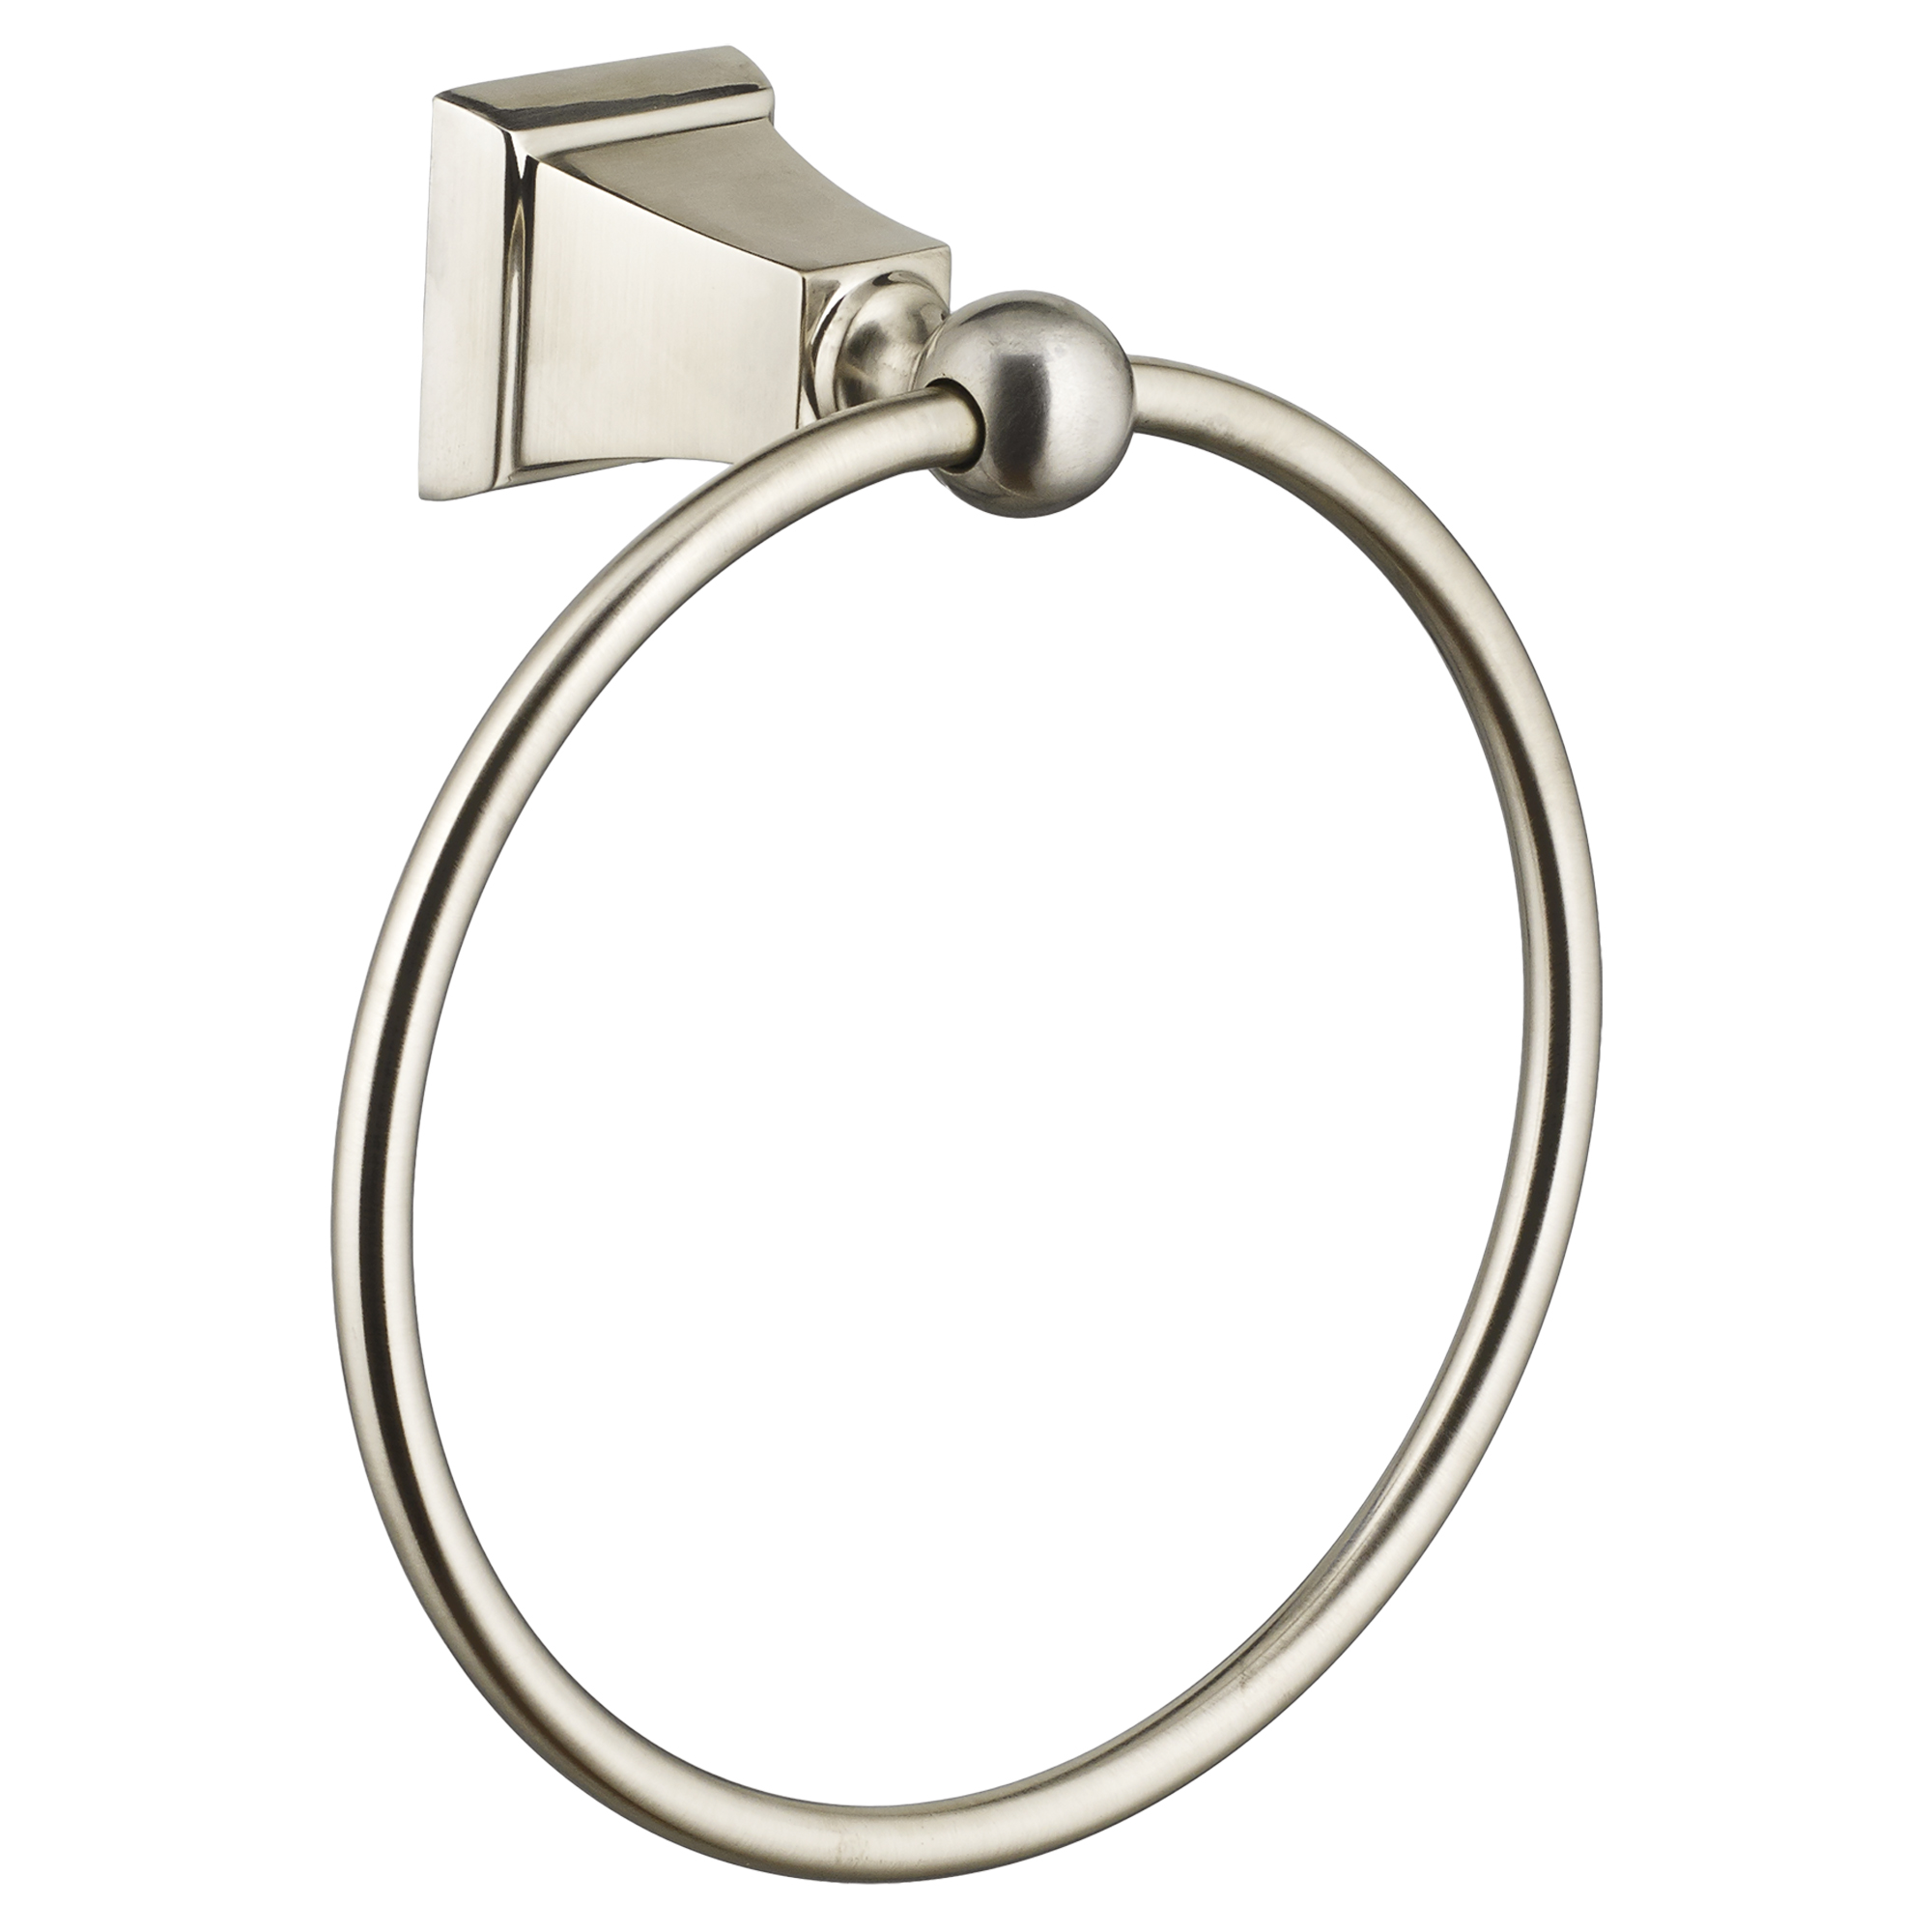 Traditional Square Towel Ring